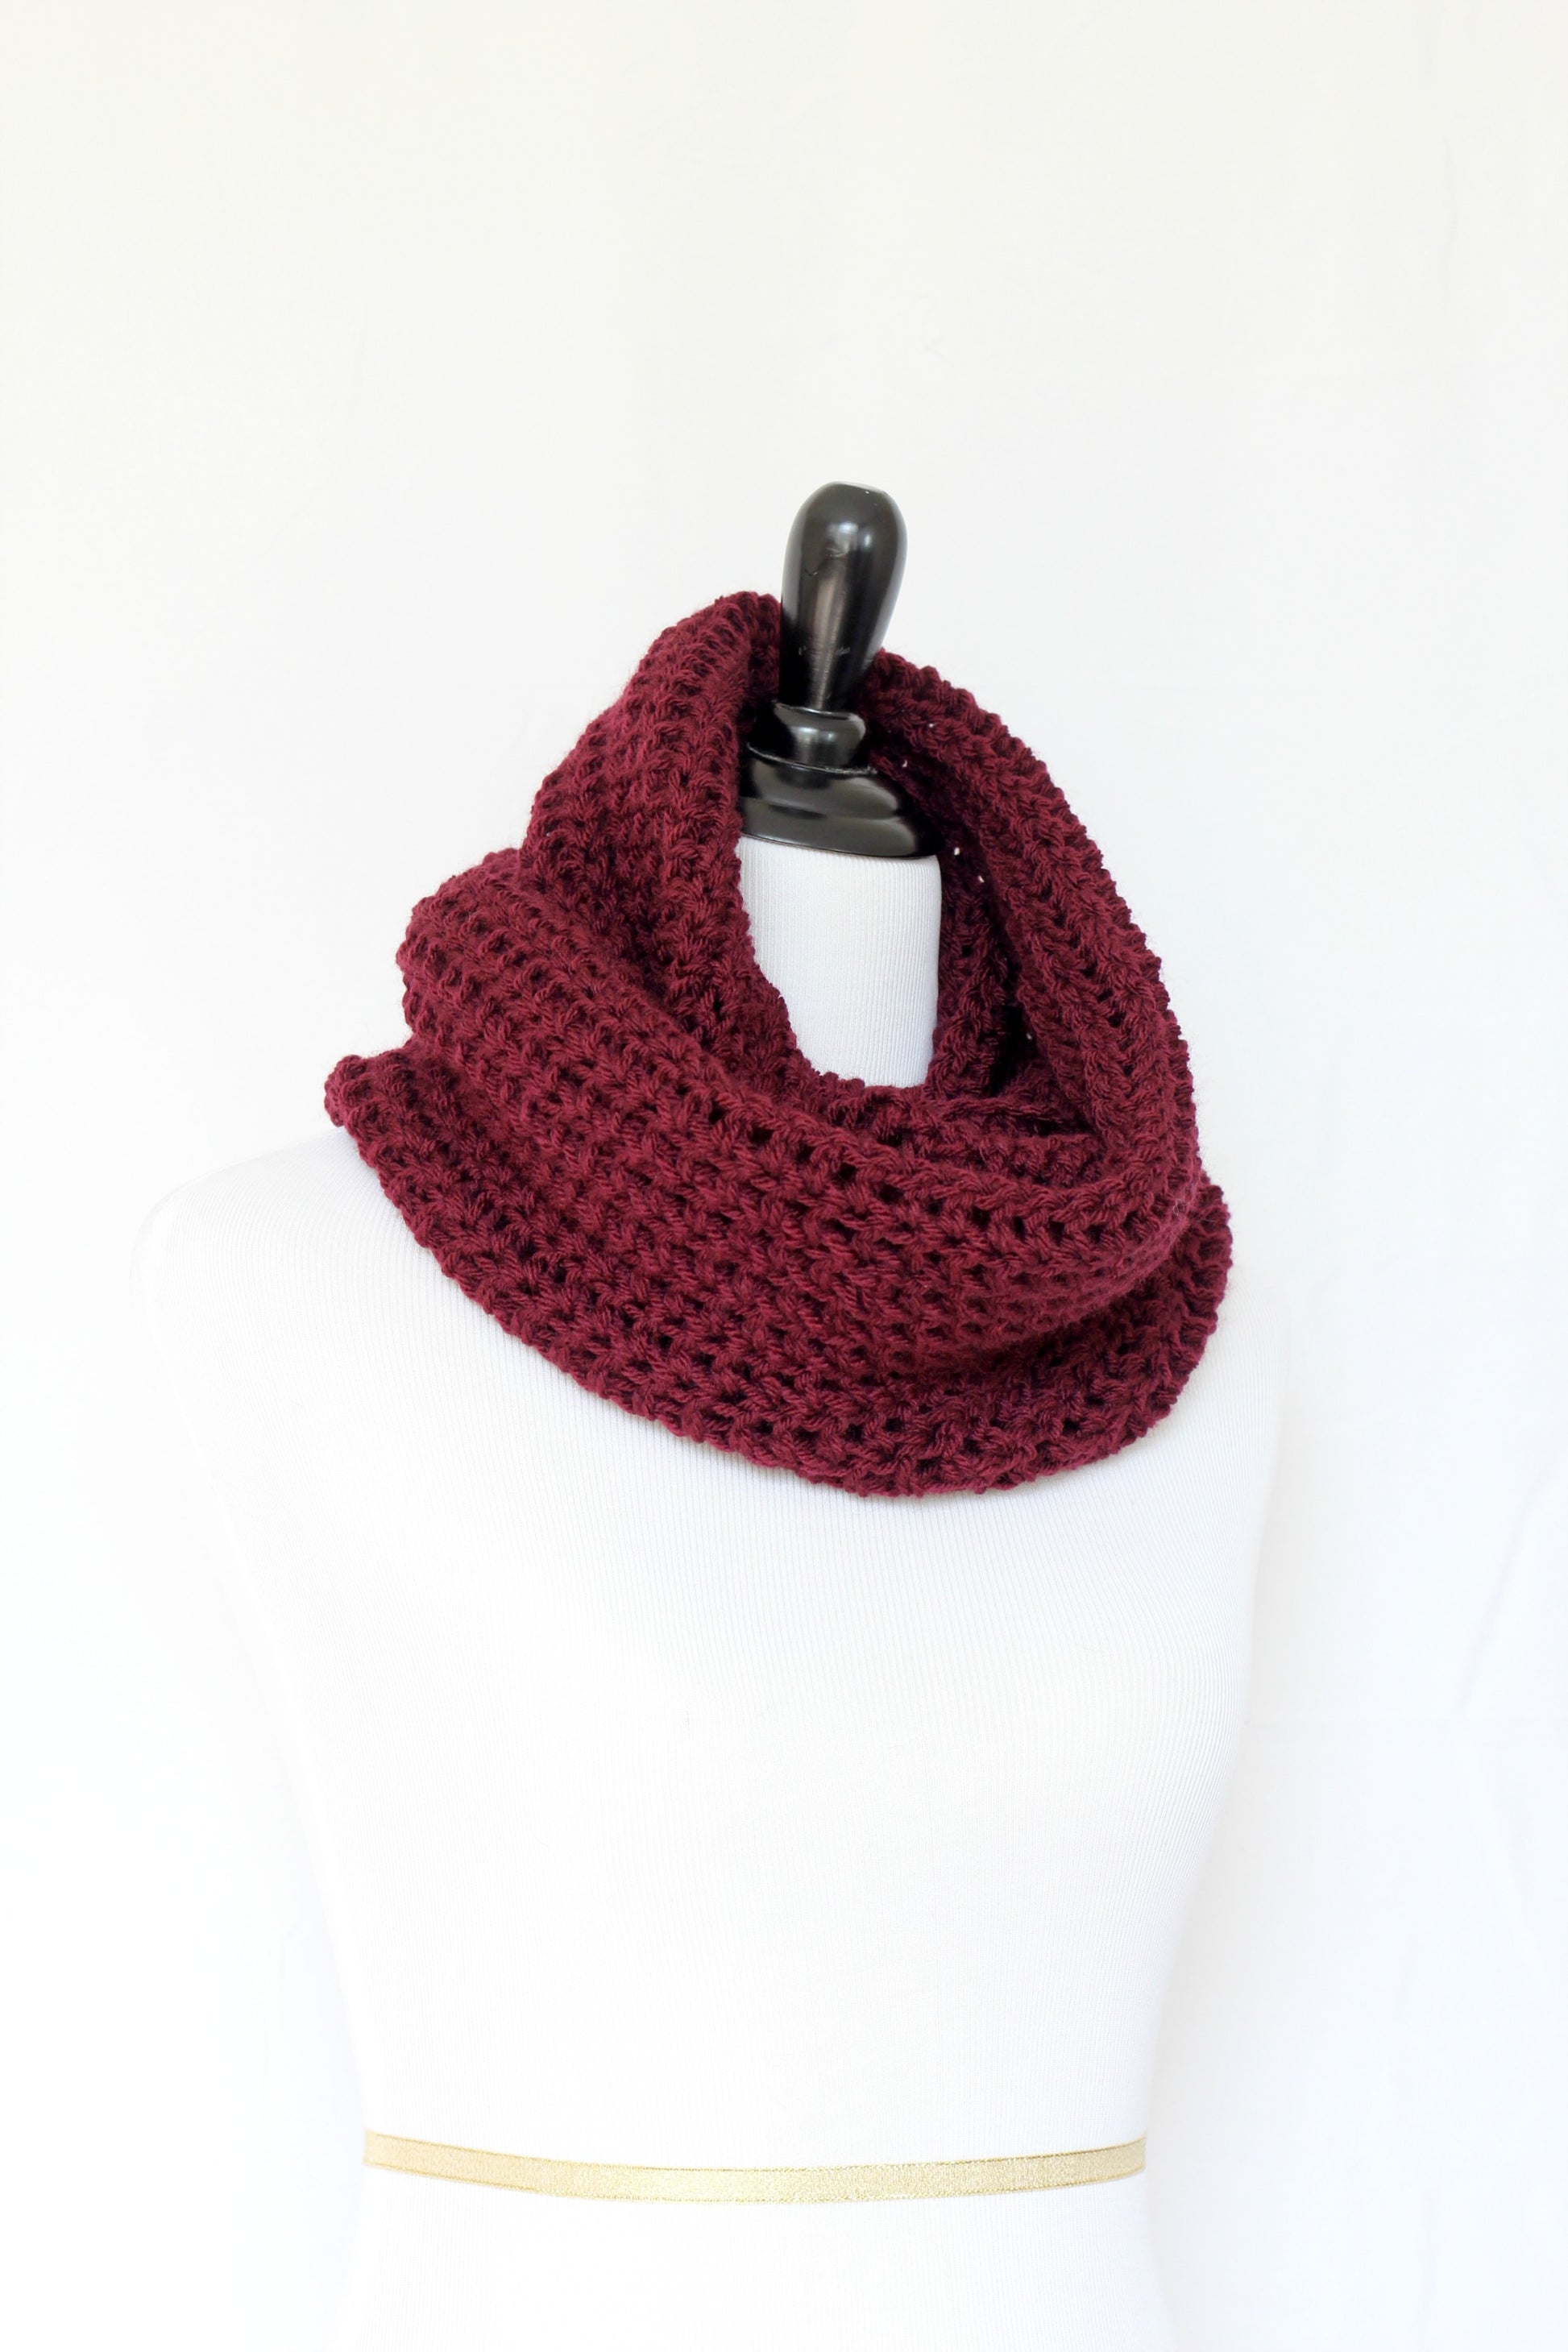 Crochet cowl in burgundy color, chunky infinity scarf